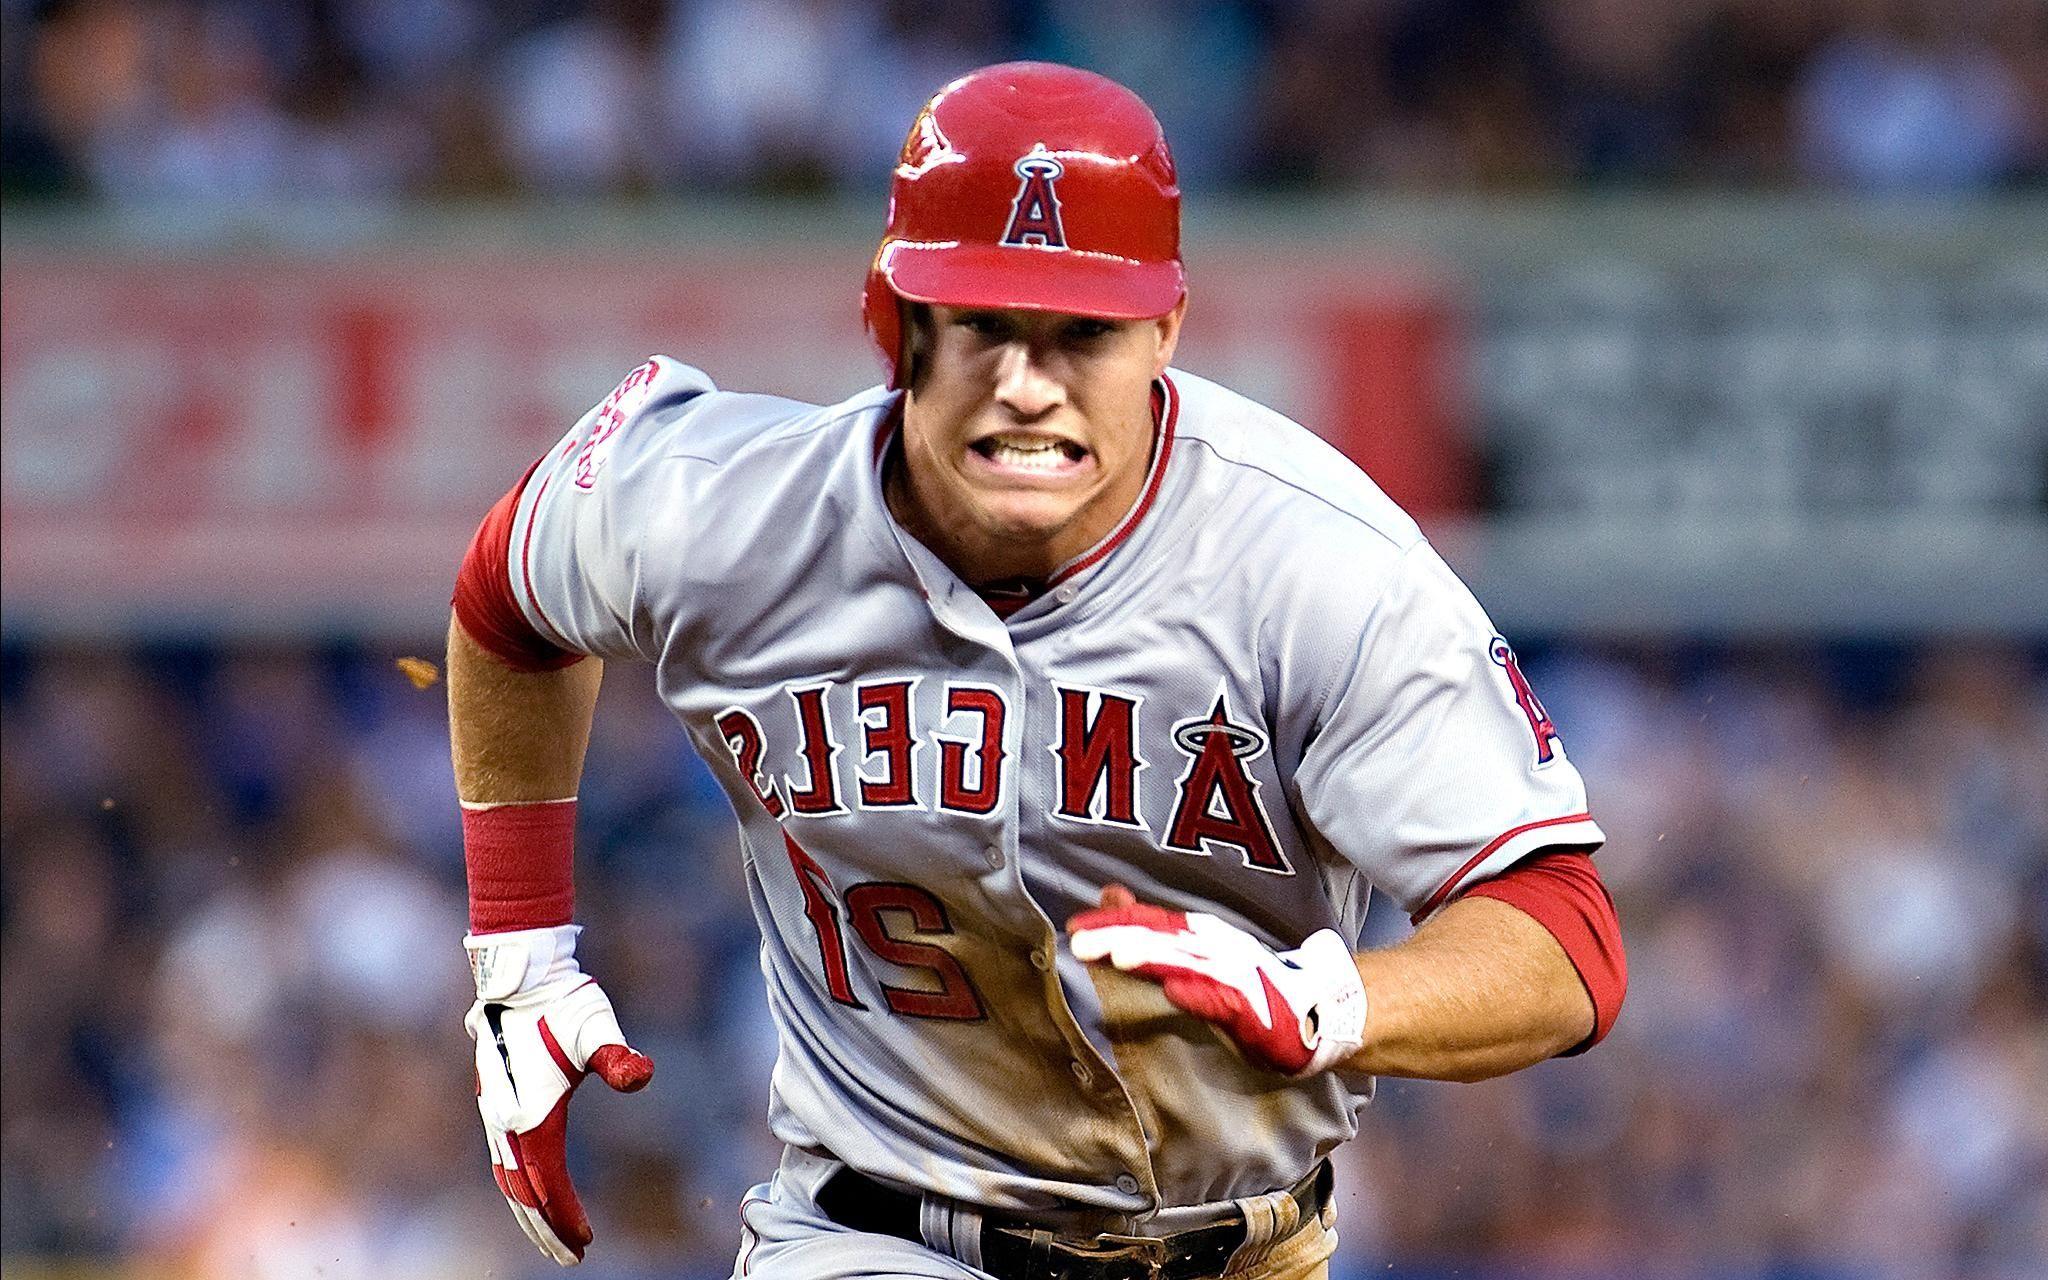 Mike Trout Wallpaper. Best Image Collections HD For Gadget